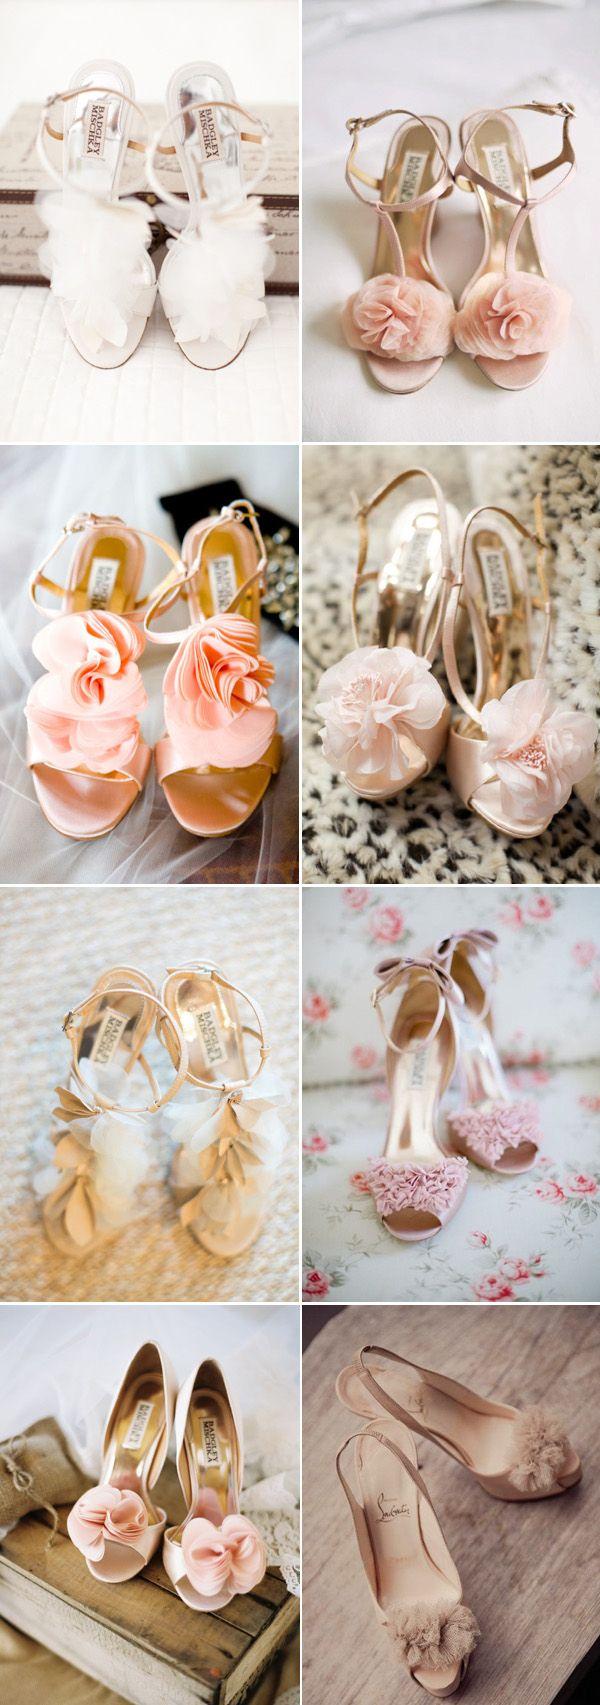 Wedding - 43 Most Wanted Wedding Shoes For Bride